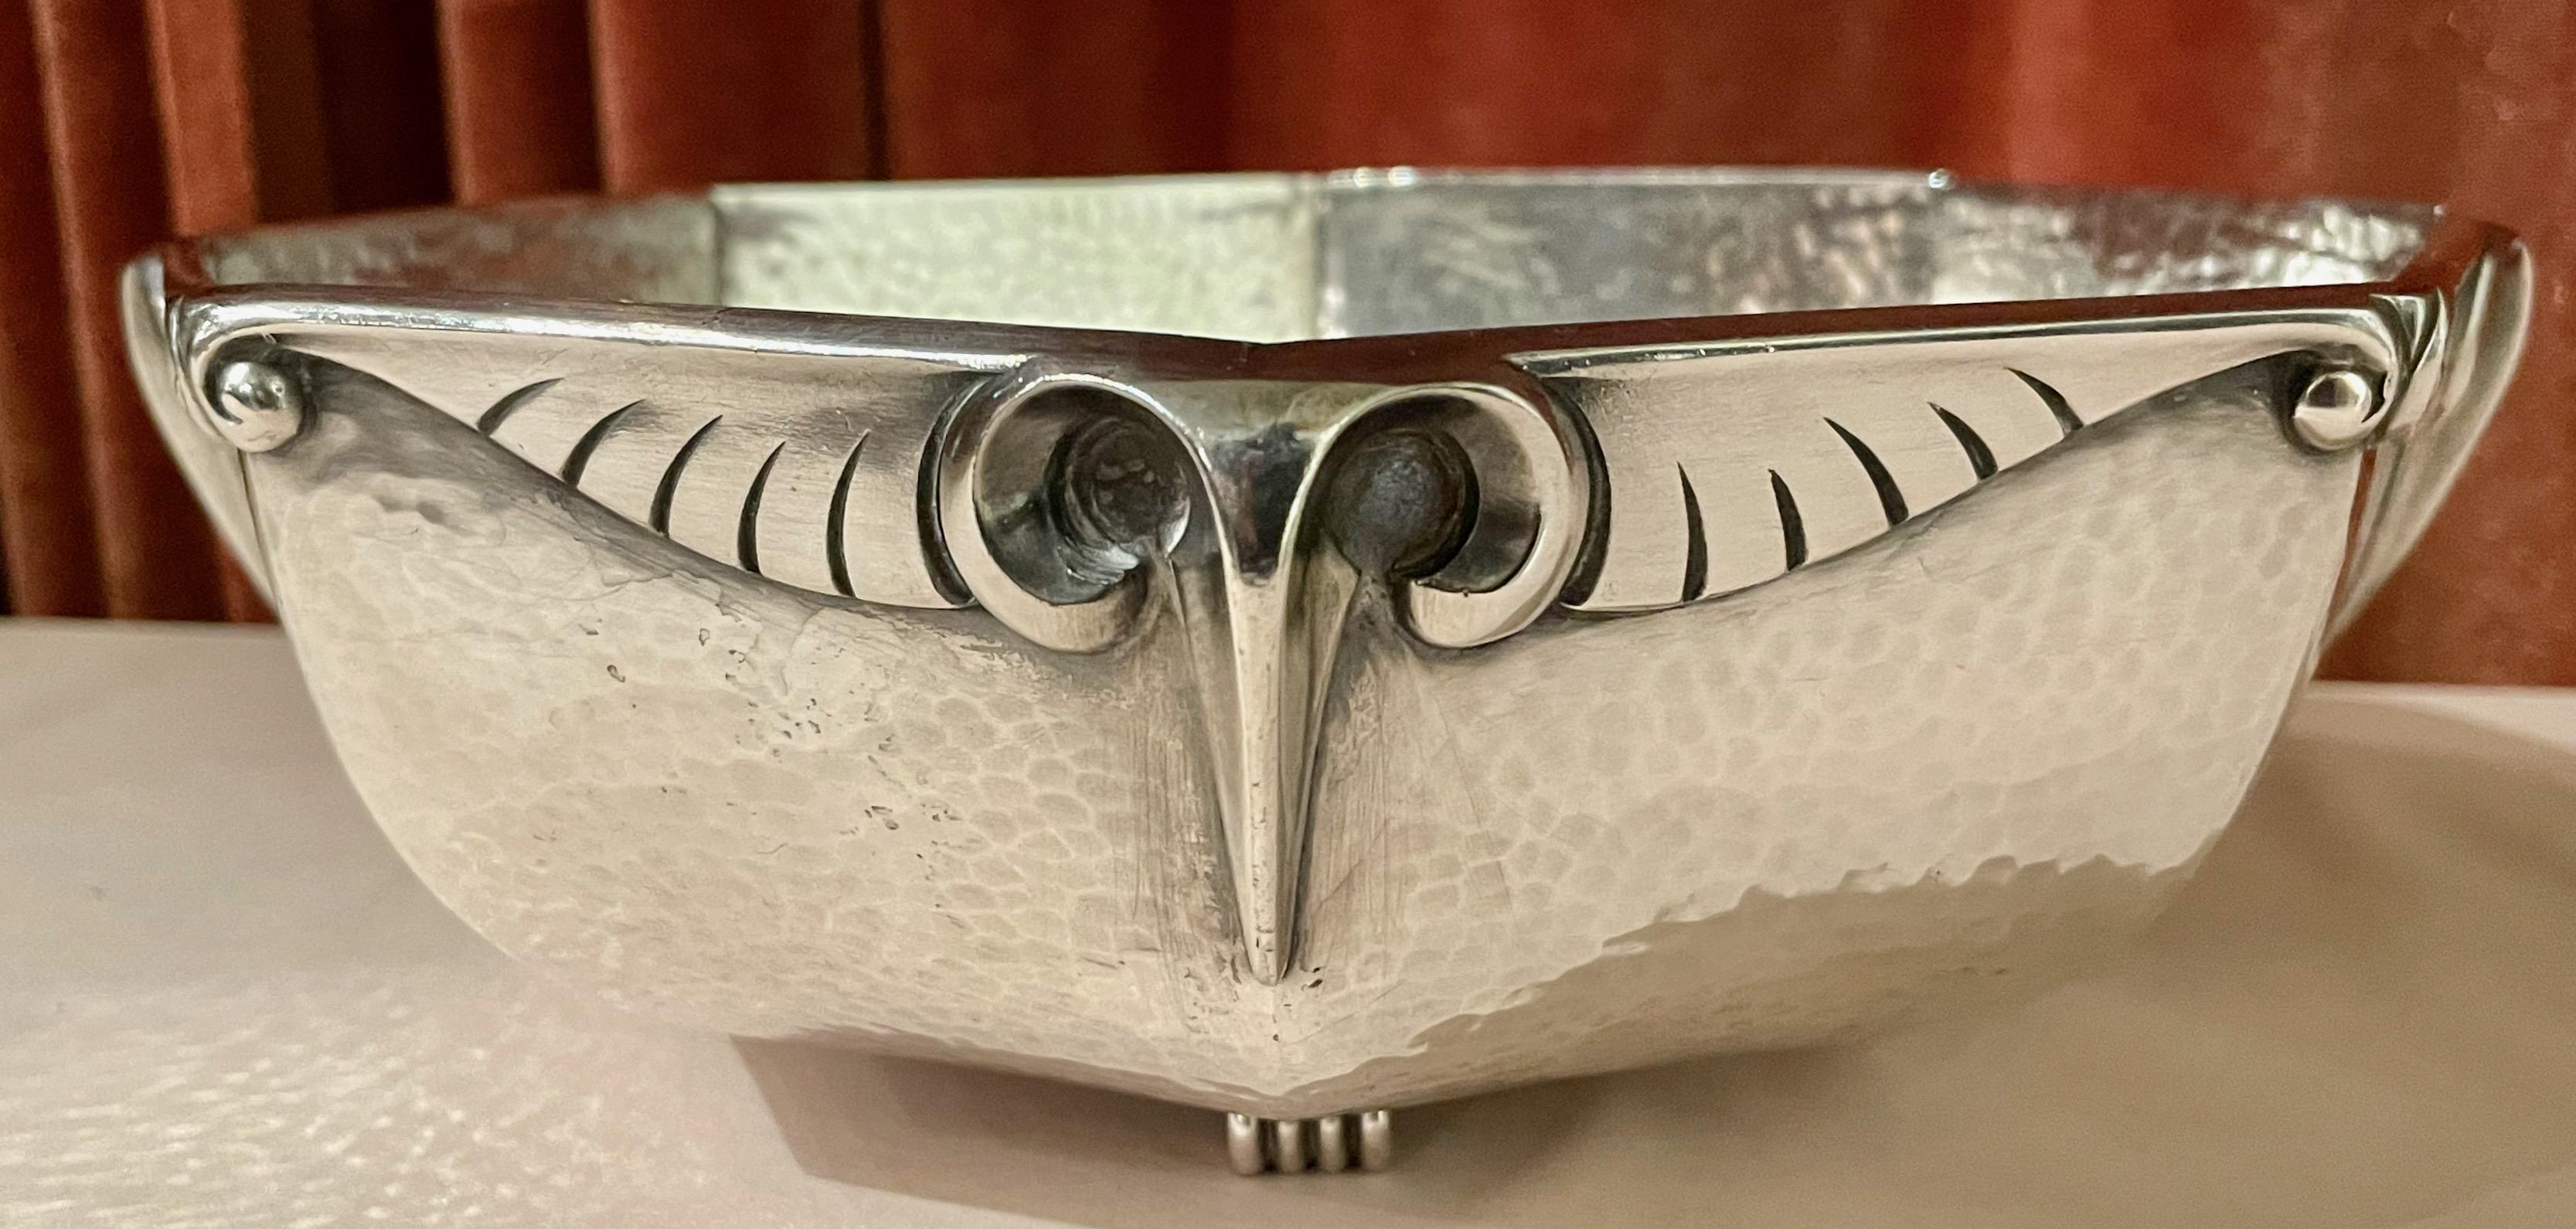 Galia silver plate bowl with stylized rams or bird head design repeated all around the 8 sided shaped bowl. Unique piece made of highest quality Christofle construction. An unusual finish that is hammered in the body and smooth in the details of the